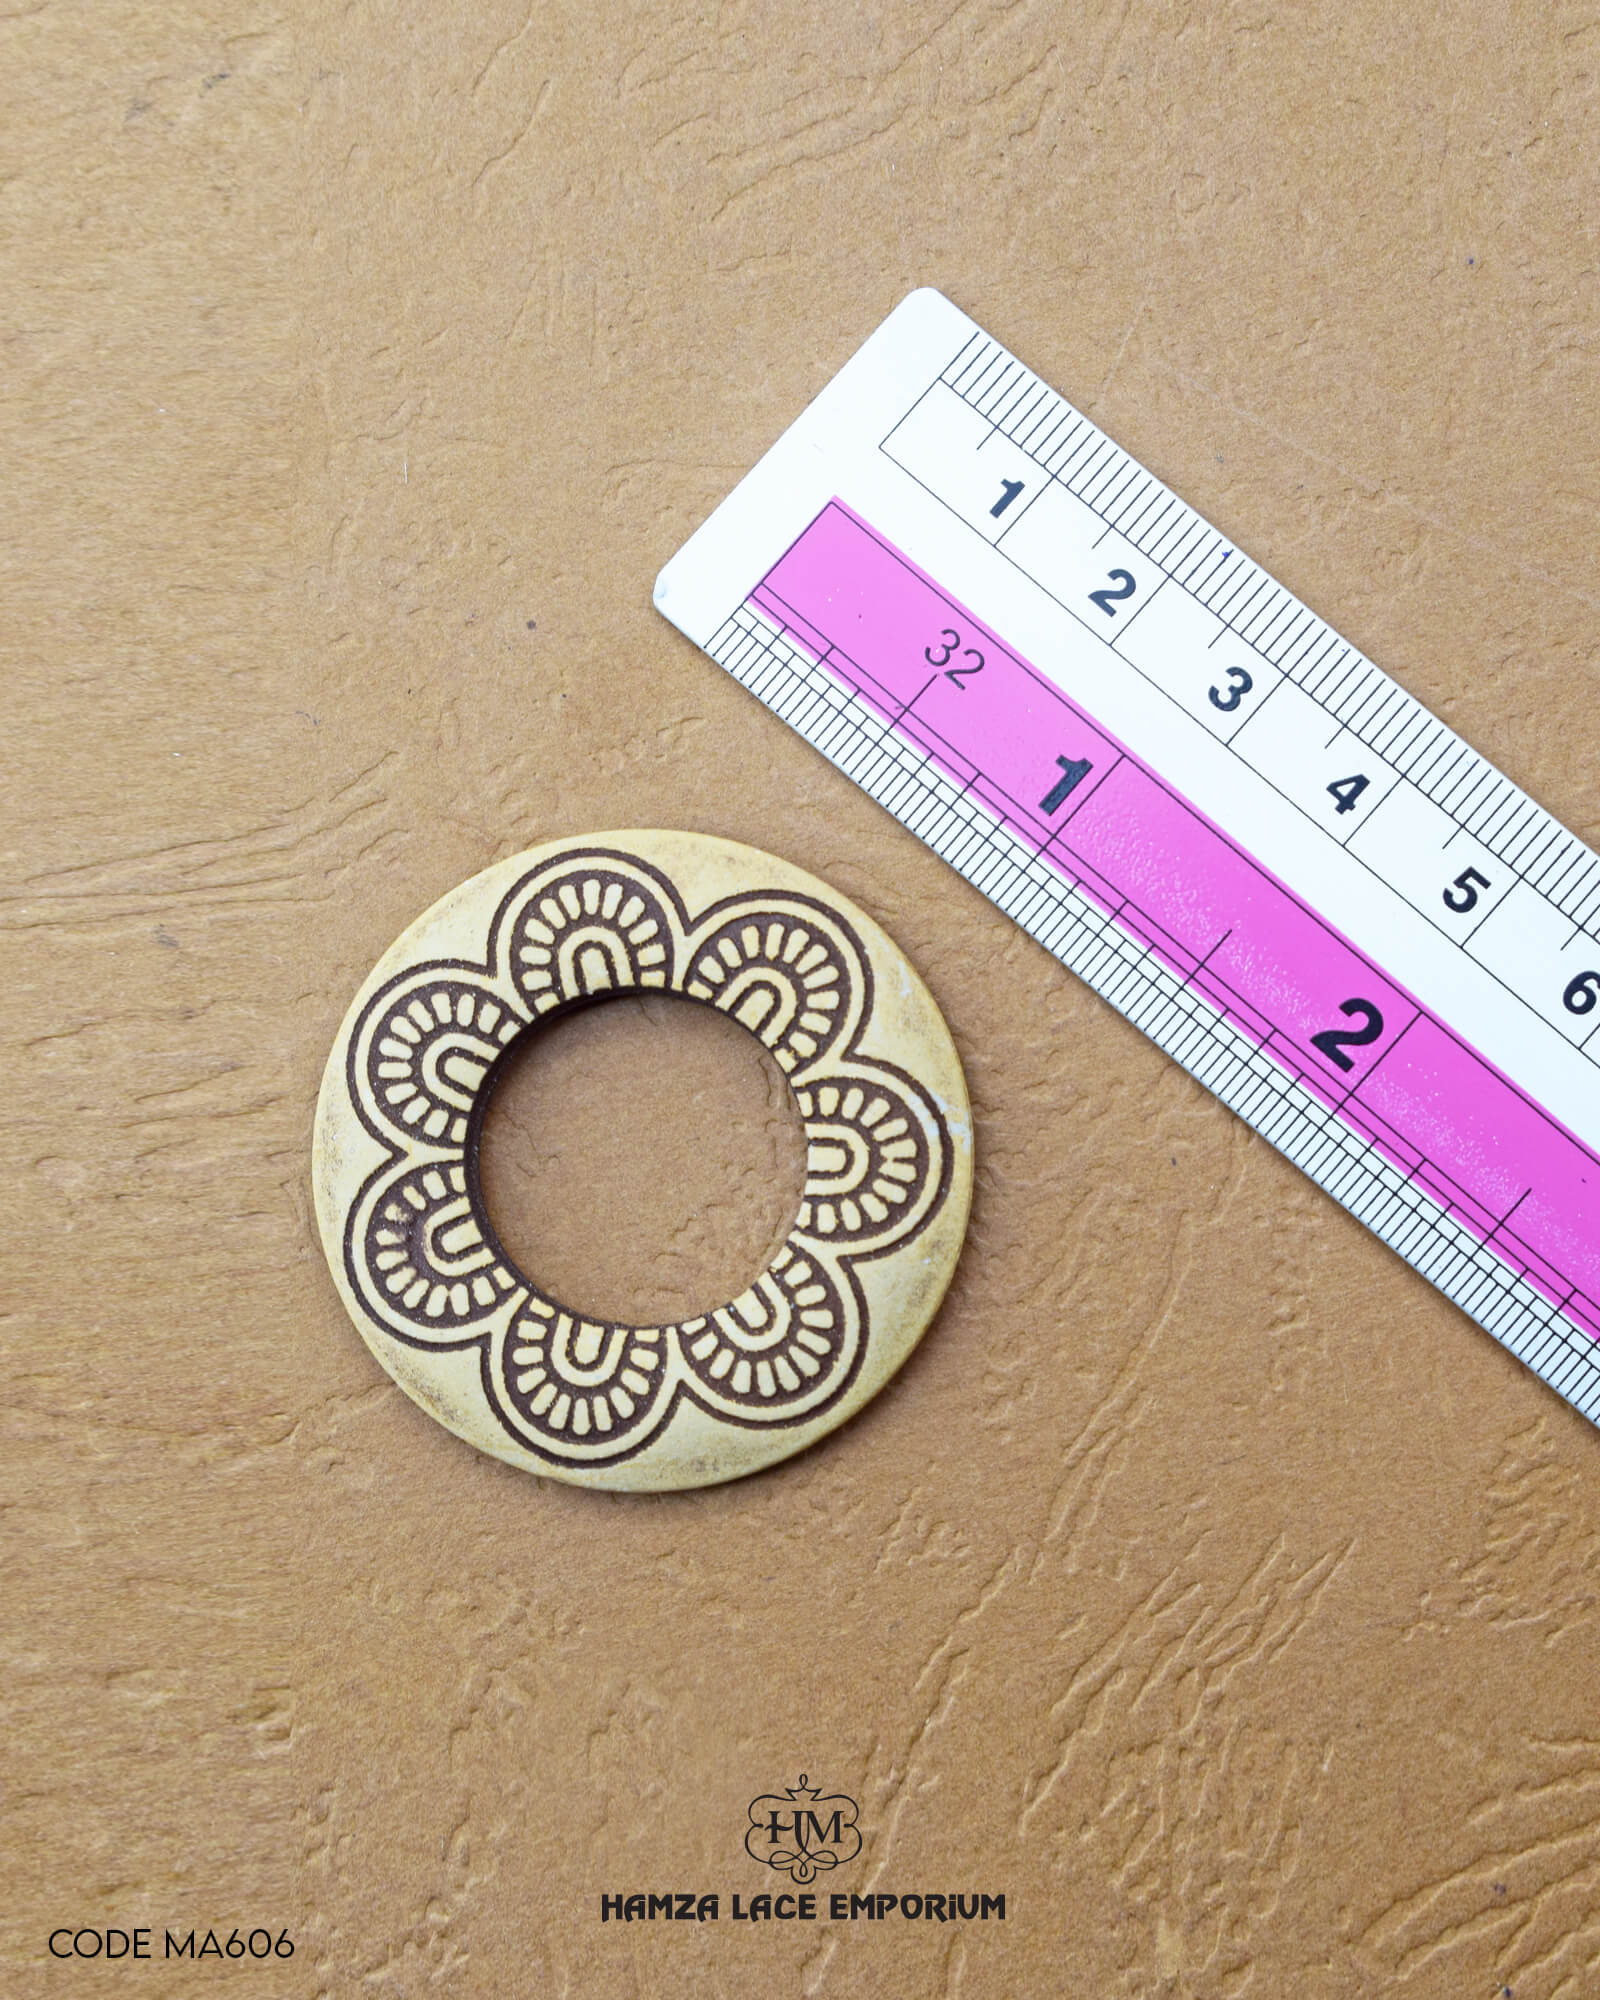 size of the 'Ring Design Button MA606' is given by using a ruler